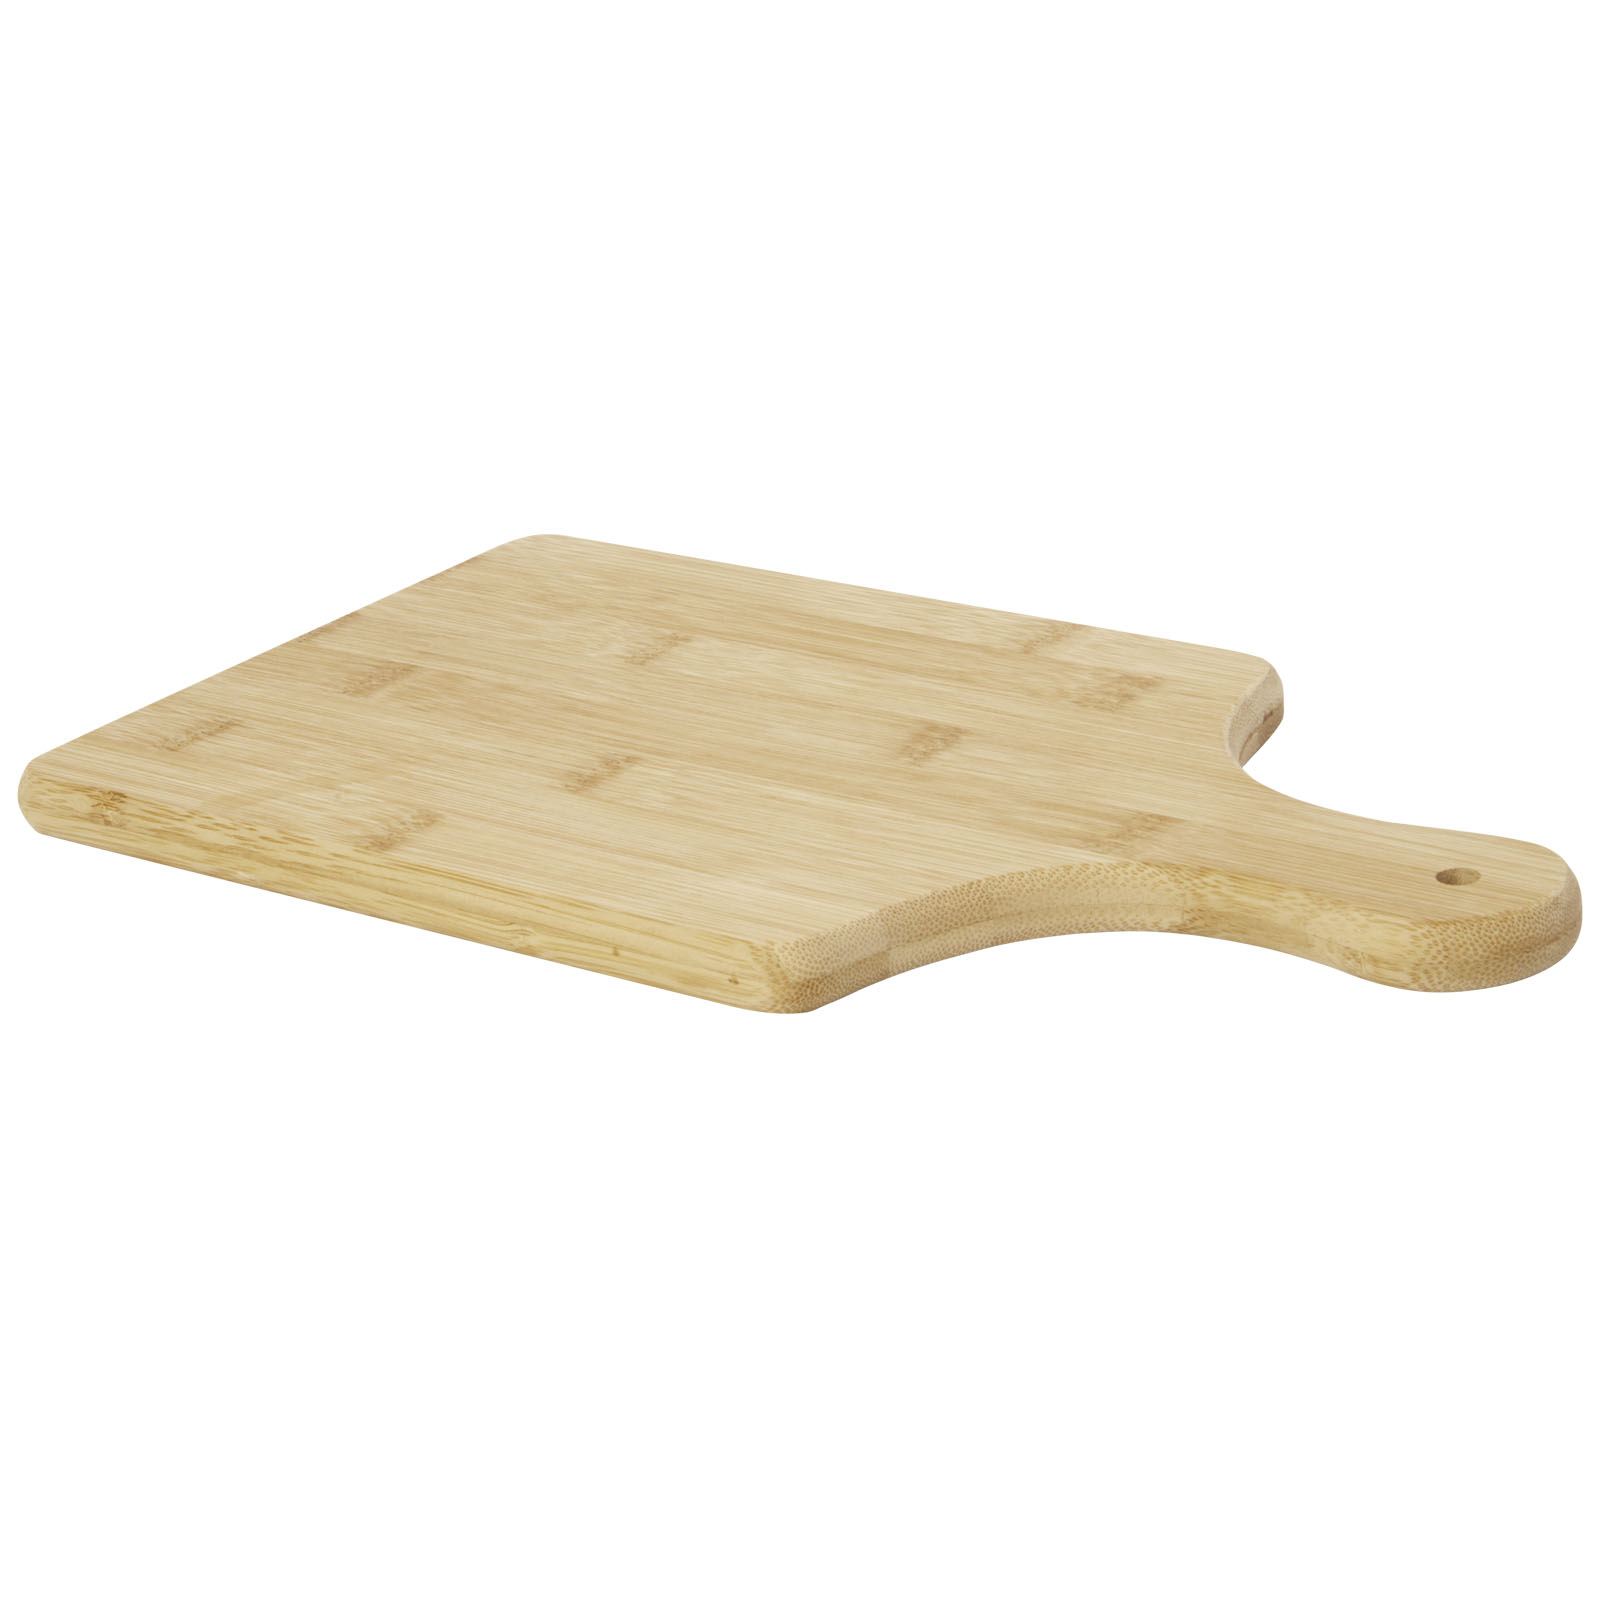 Advertising Cutting Boards - Quimet bamboo cutting board - 3